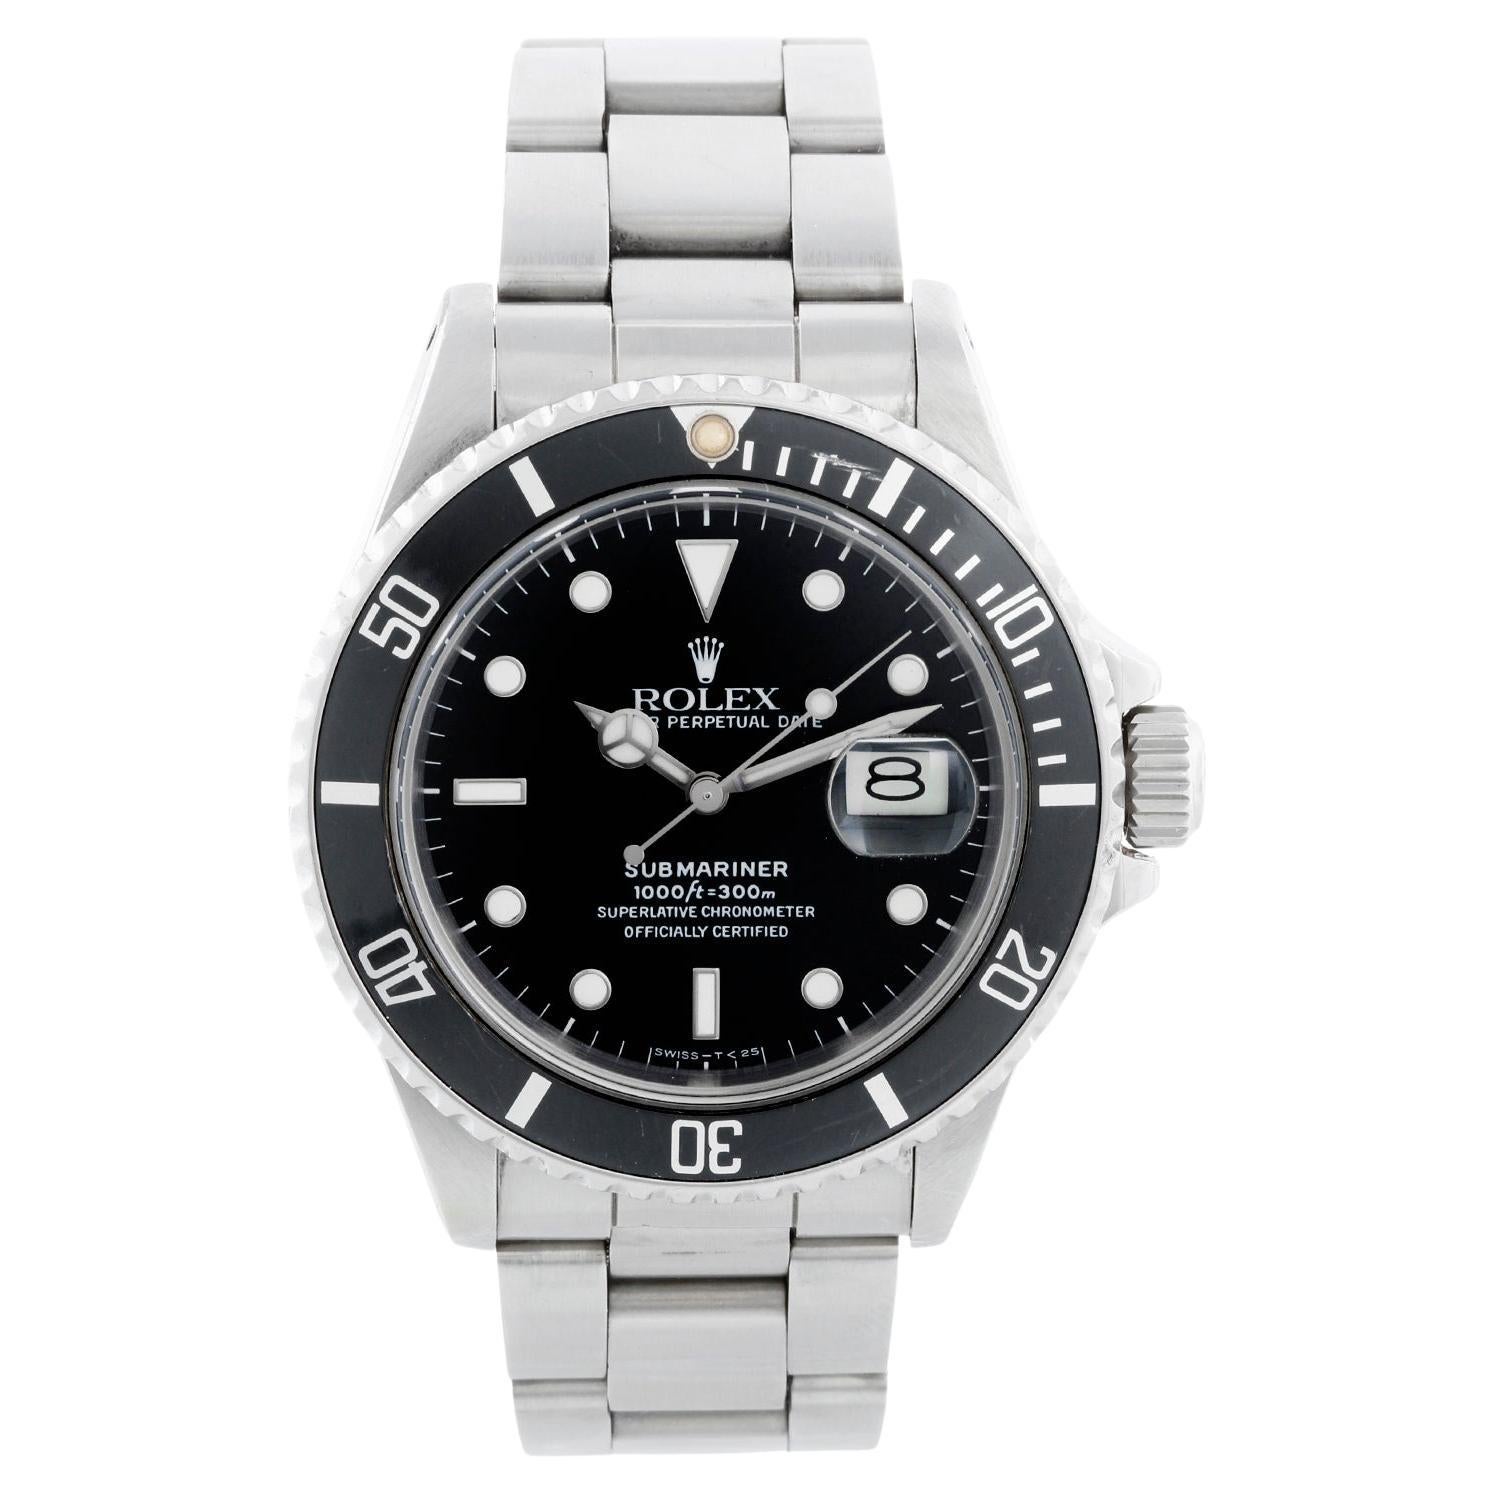 When is the best time to buy a Rolex?